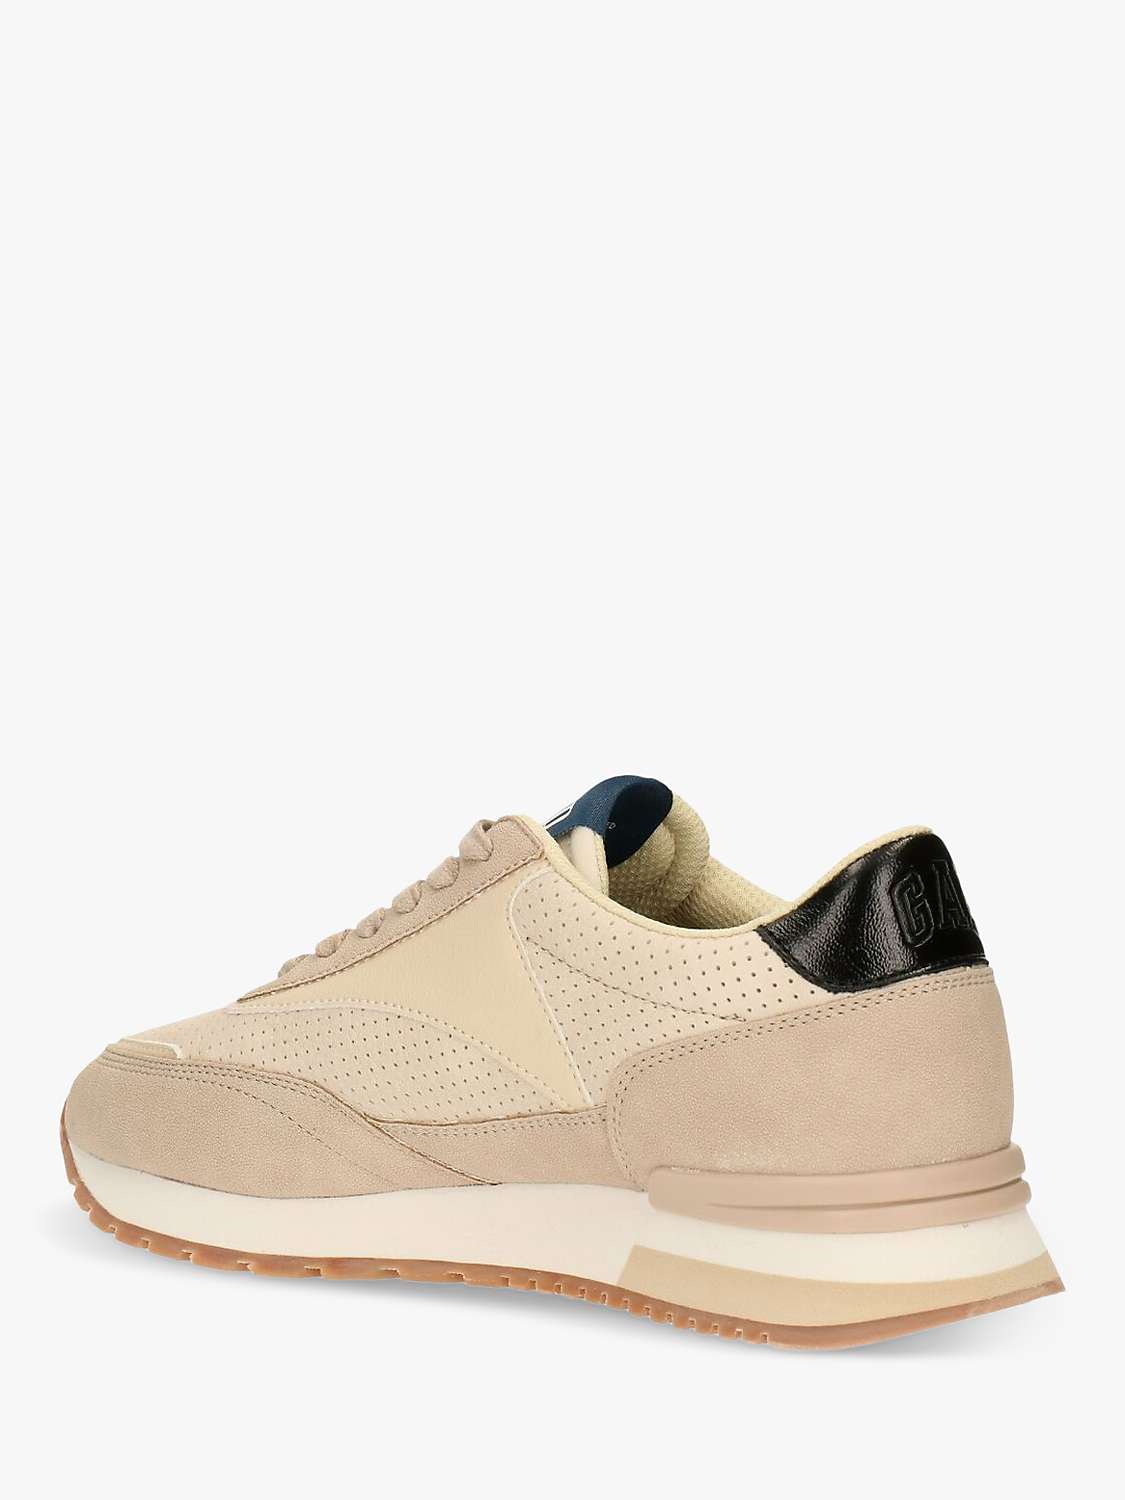 Buy Gap Kids' New York Perforated Lace Up Trainers, Sand/Khaki Online at johnlewis.com